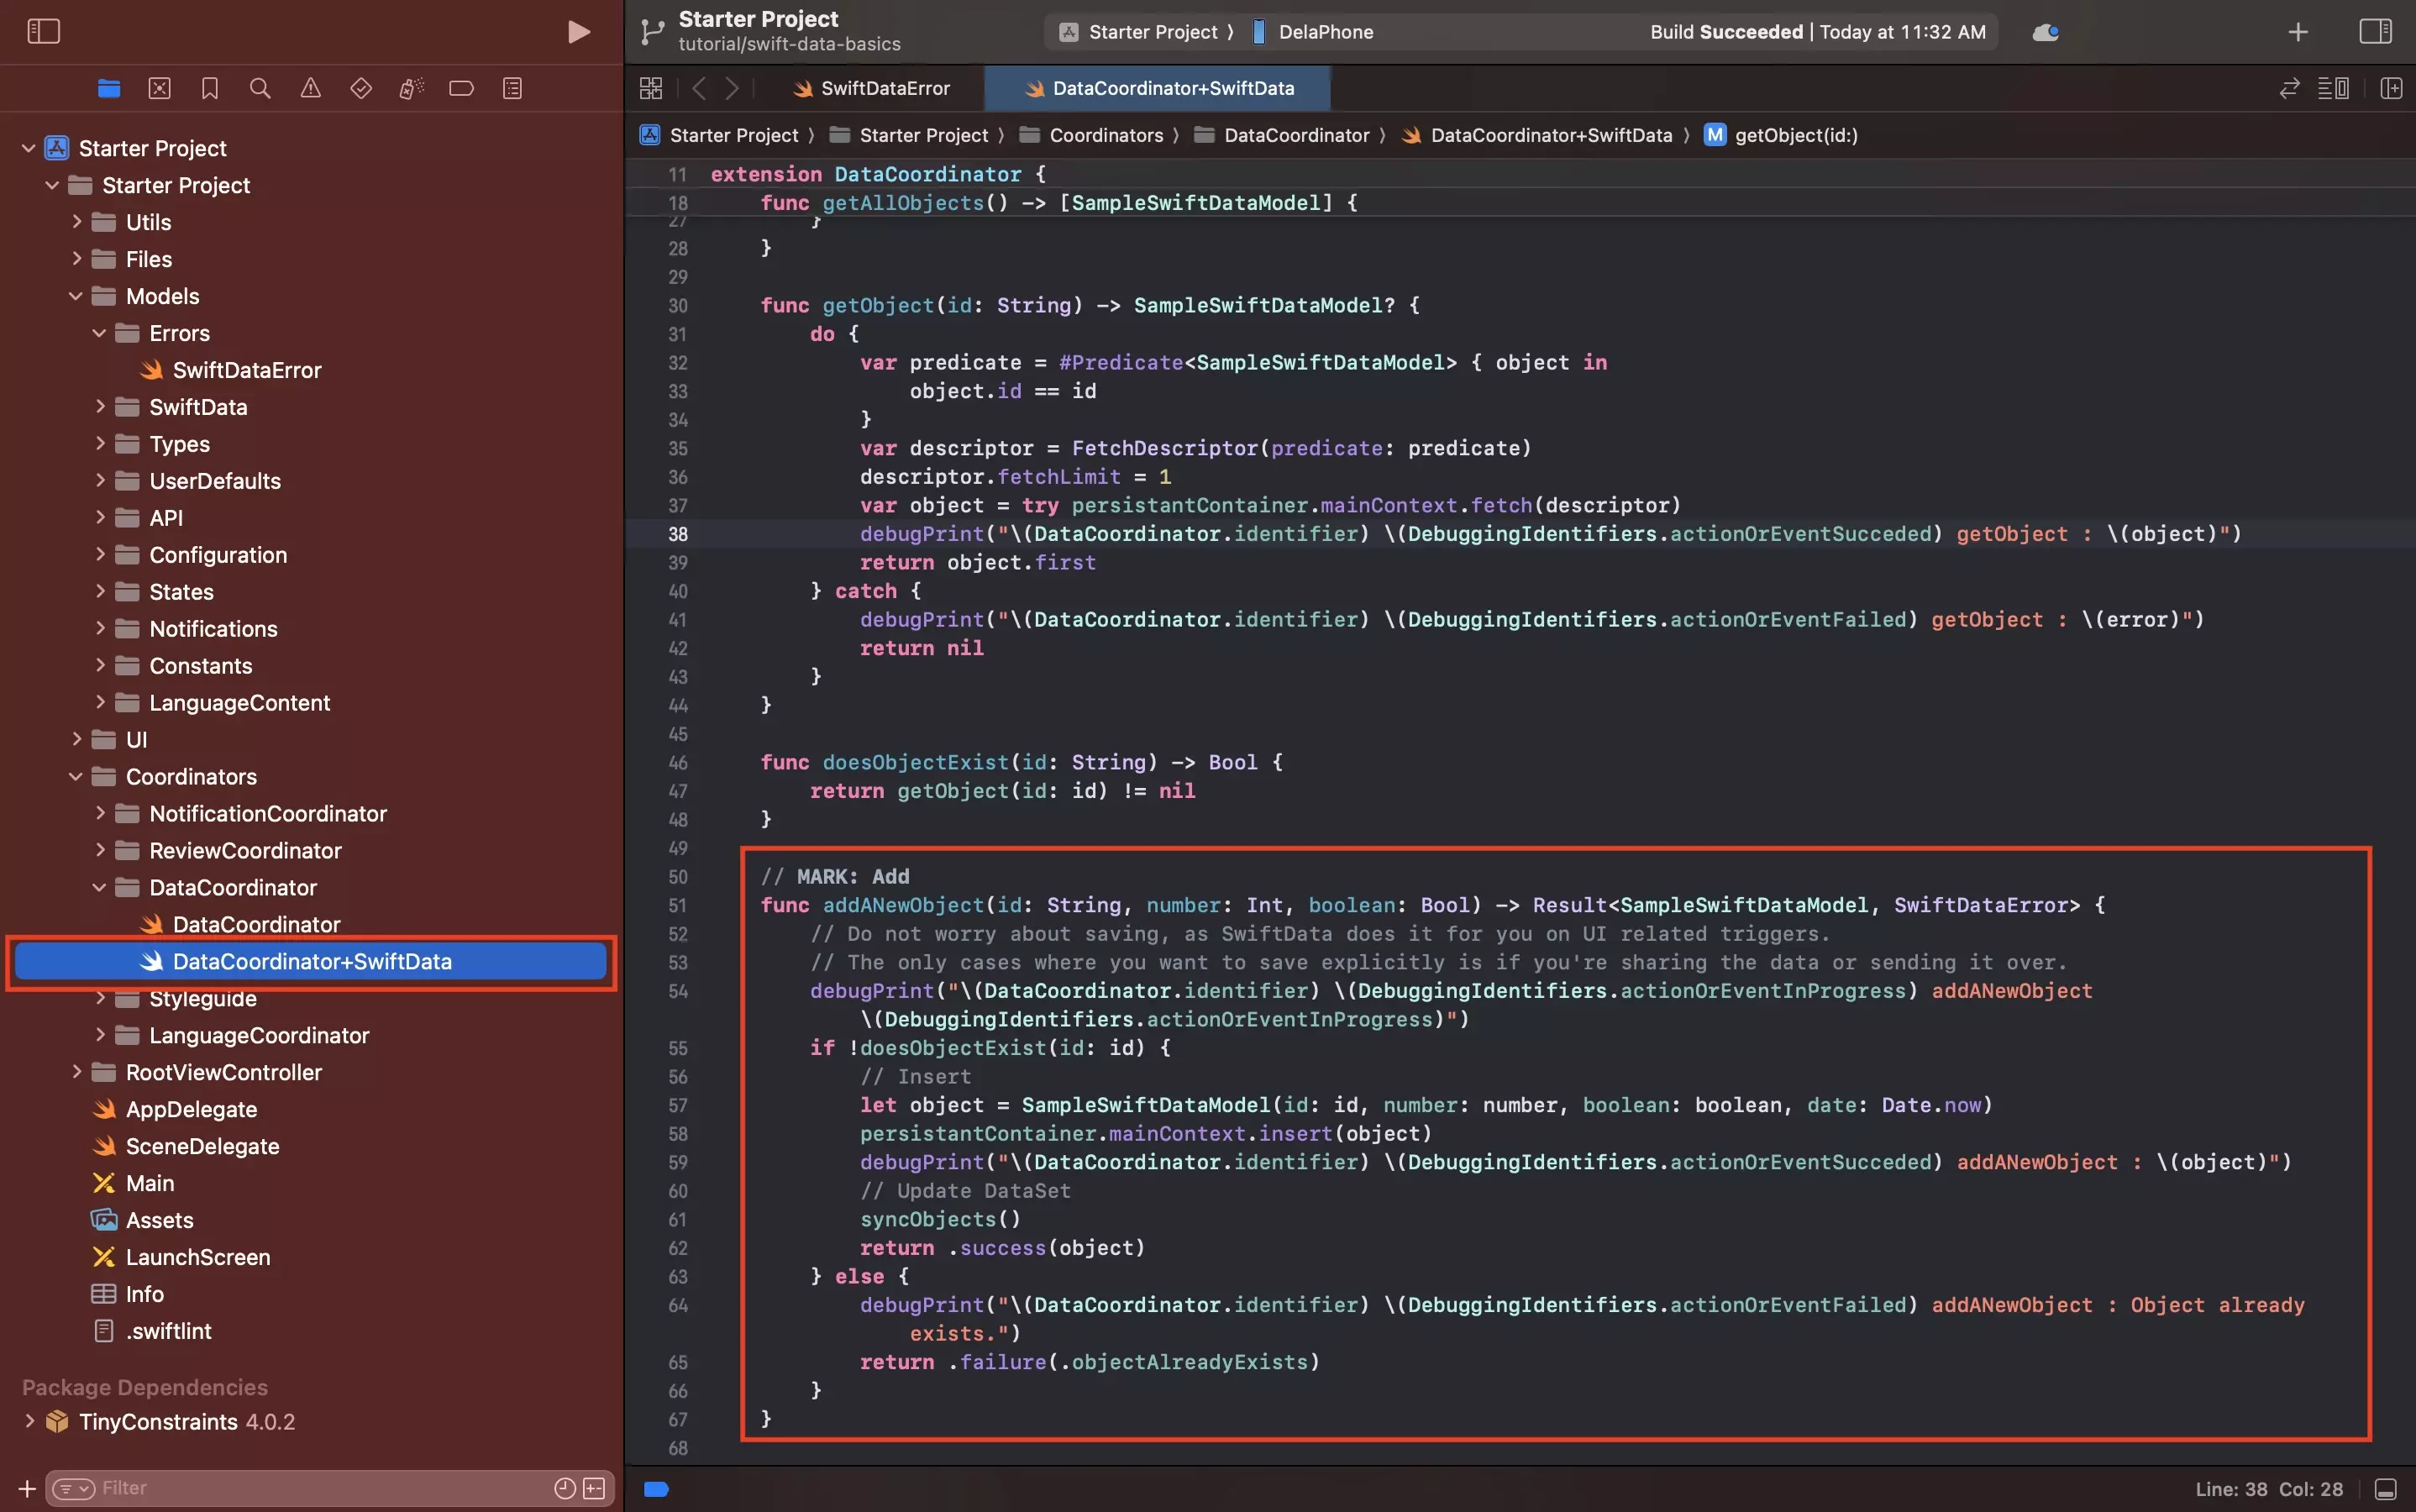 A screenshot of Xcode showing the sample functionality that adds a new SwiftData object to a persistent container. The code snippet is available below.